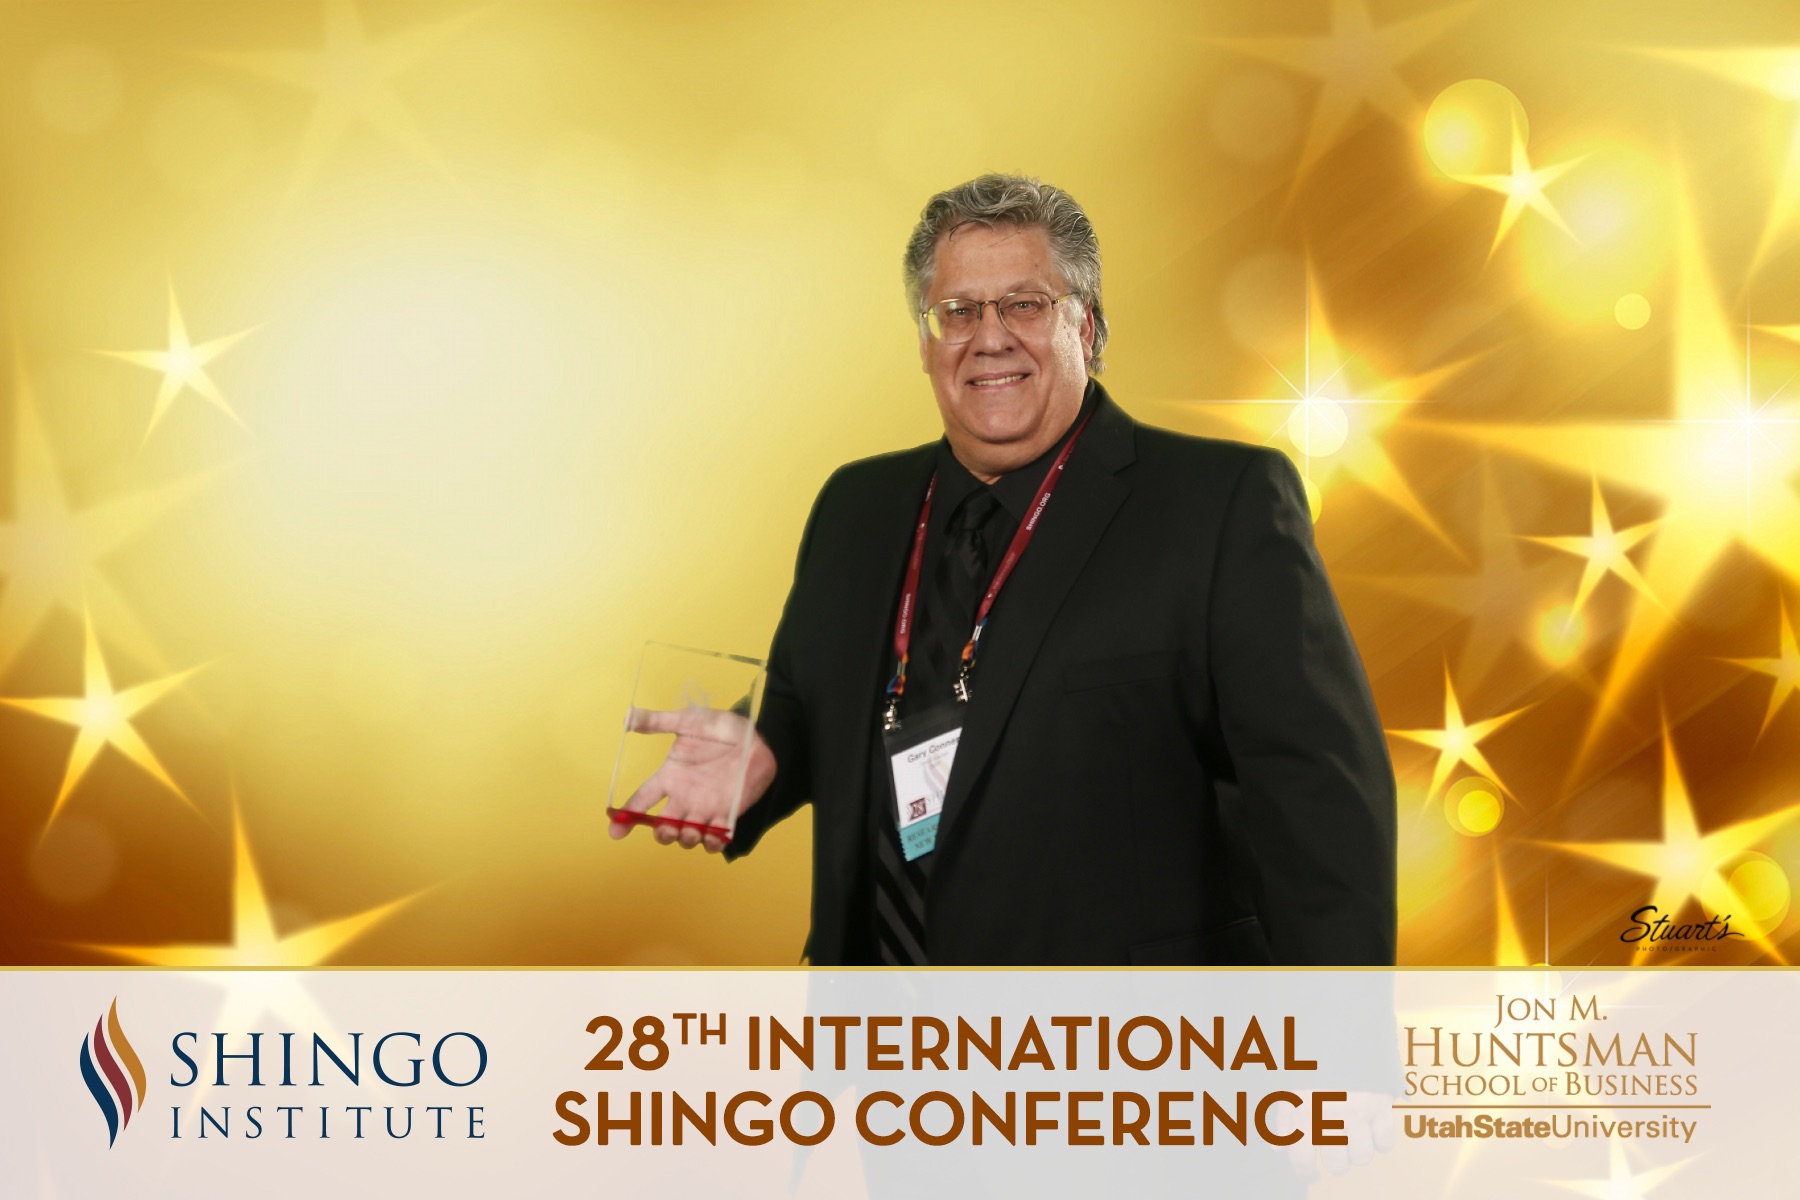 Oregon Manufacturing Consultant Honored with Shingo Award, International Recognition for Research and Professional Publications